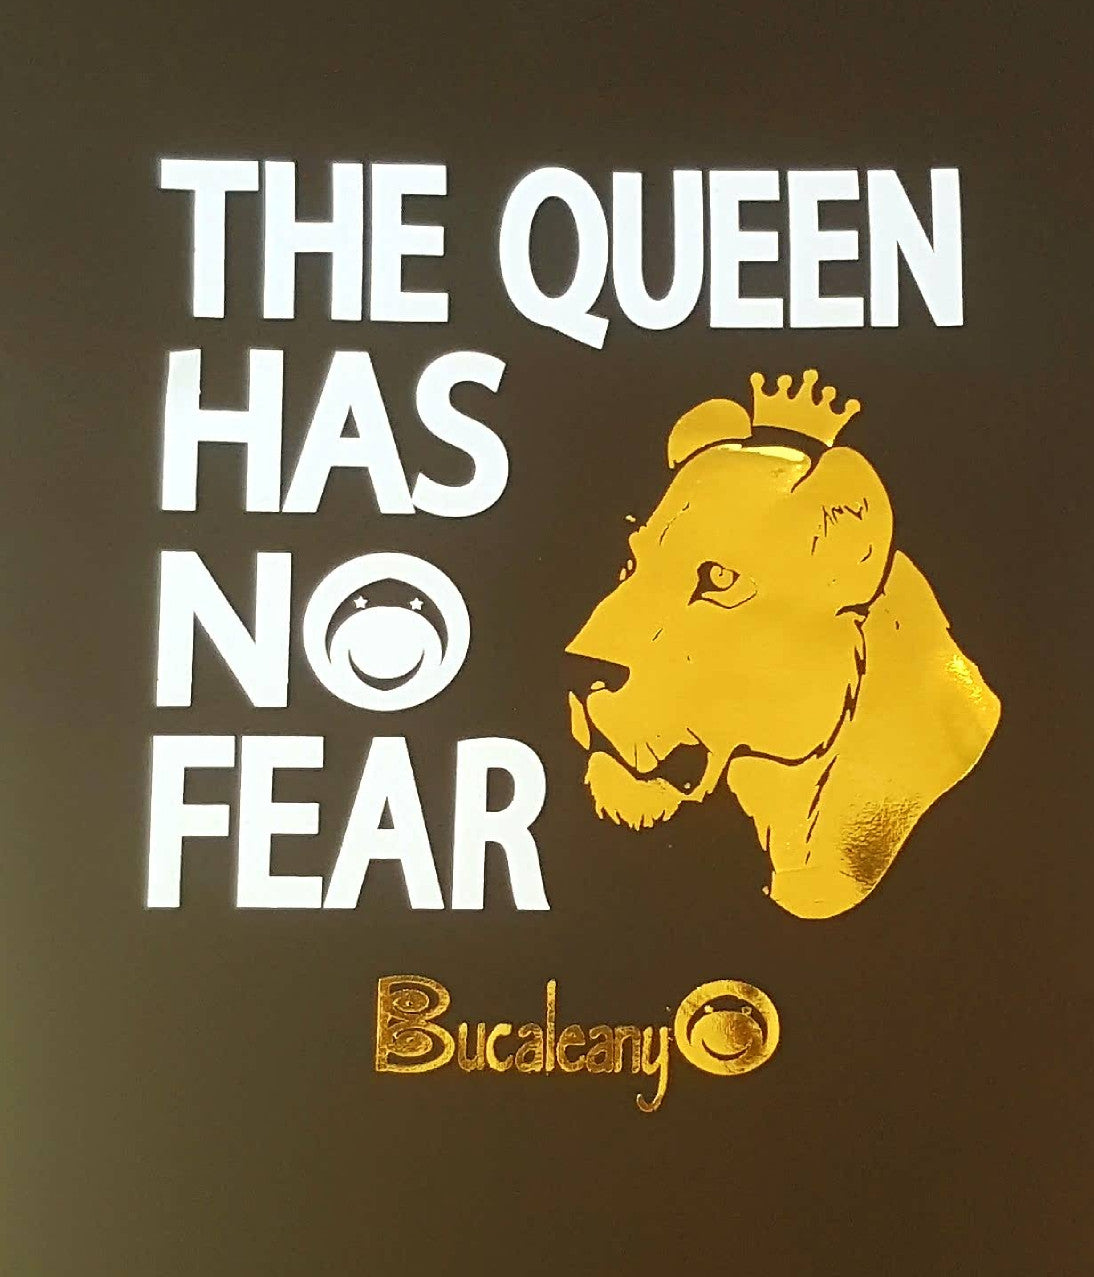 The Queen Has No Fear Tshirt - BUCALEANY